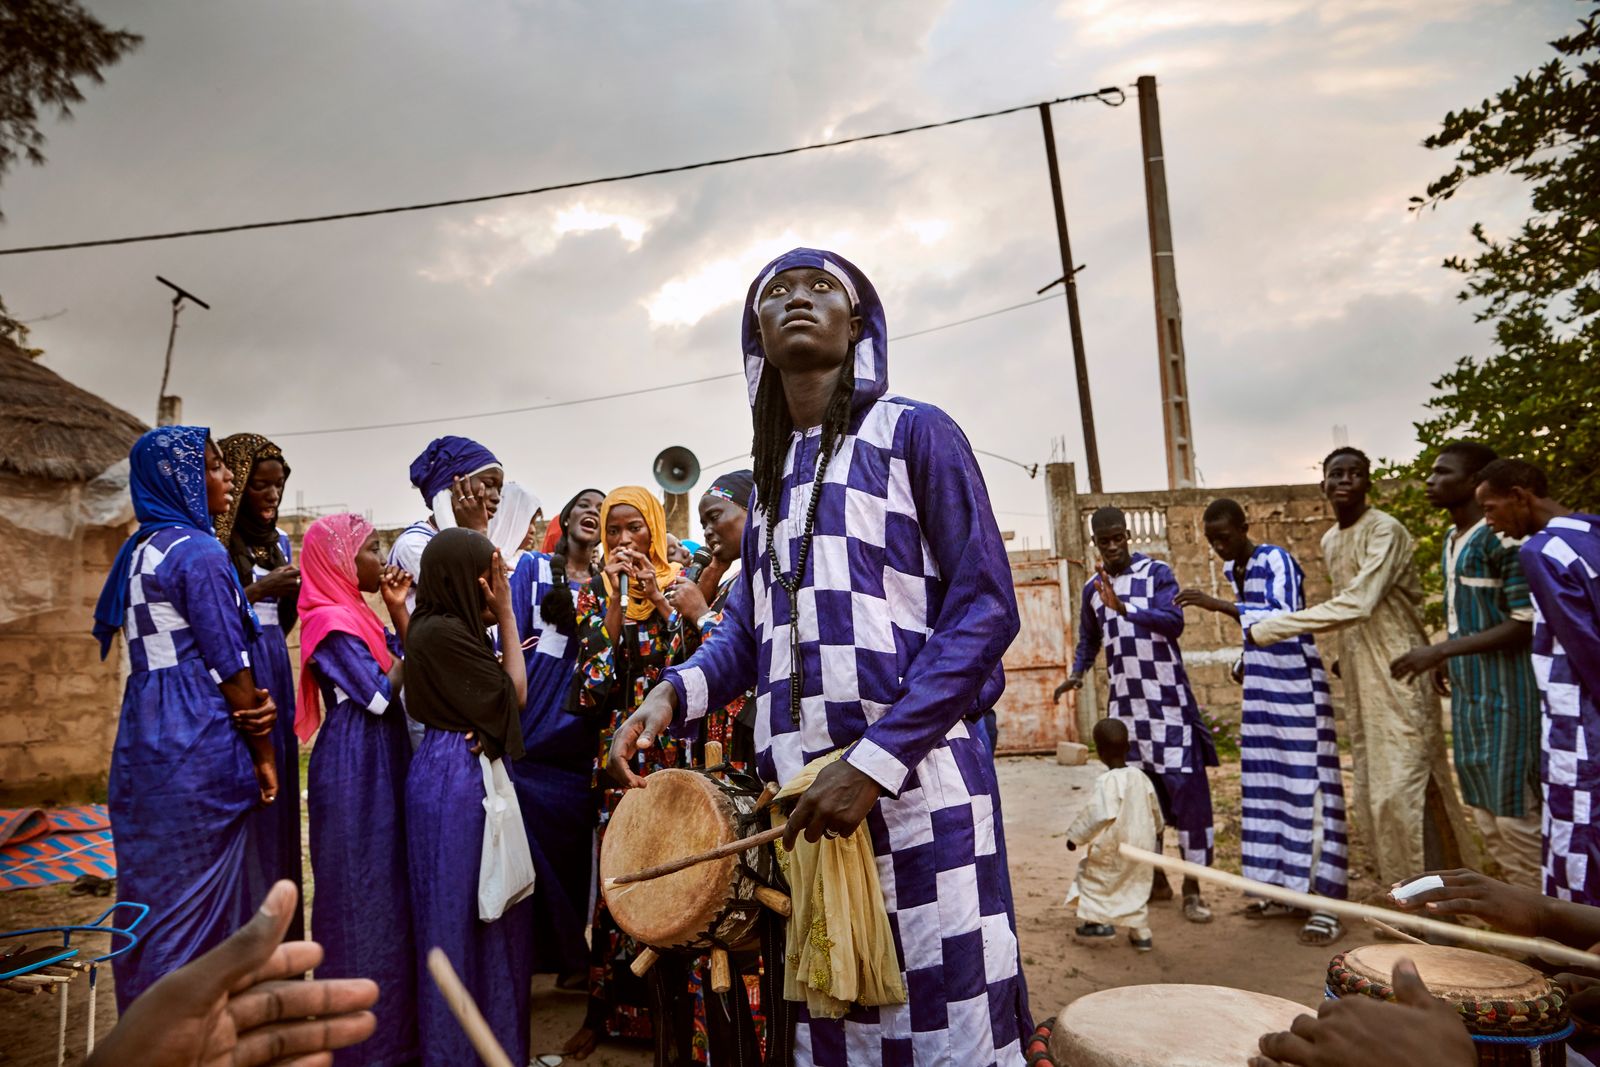 © Christian Bobst - Image from the The Sufi Brotherhoods of Senegal photography project